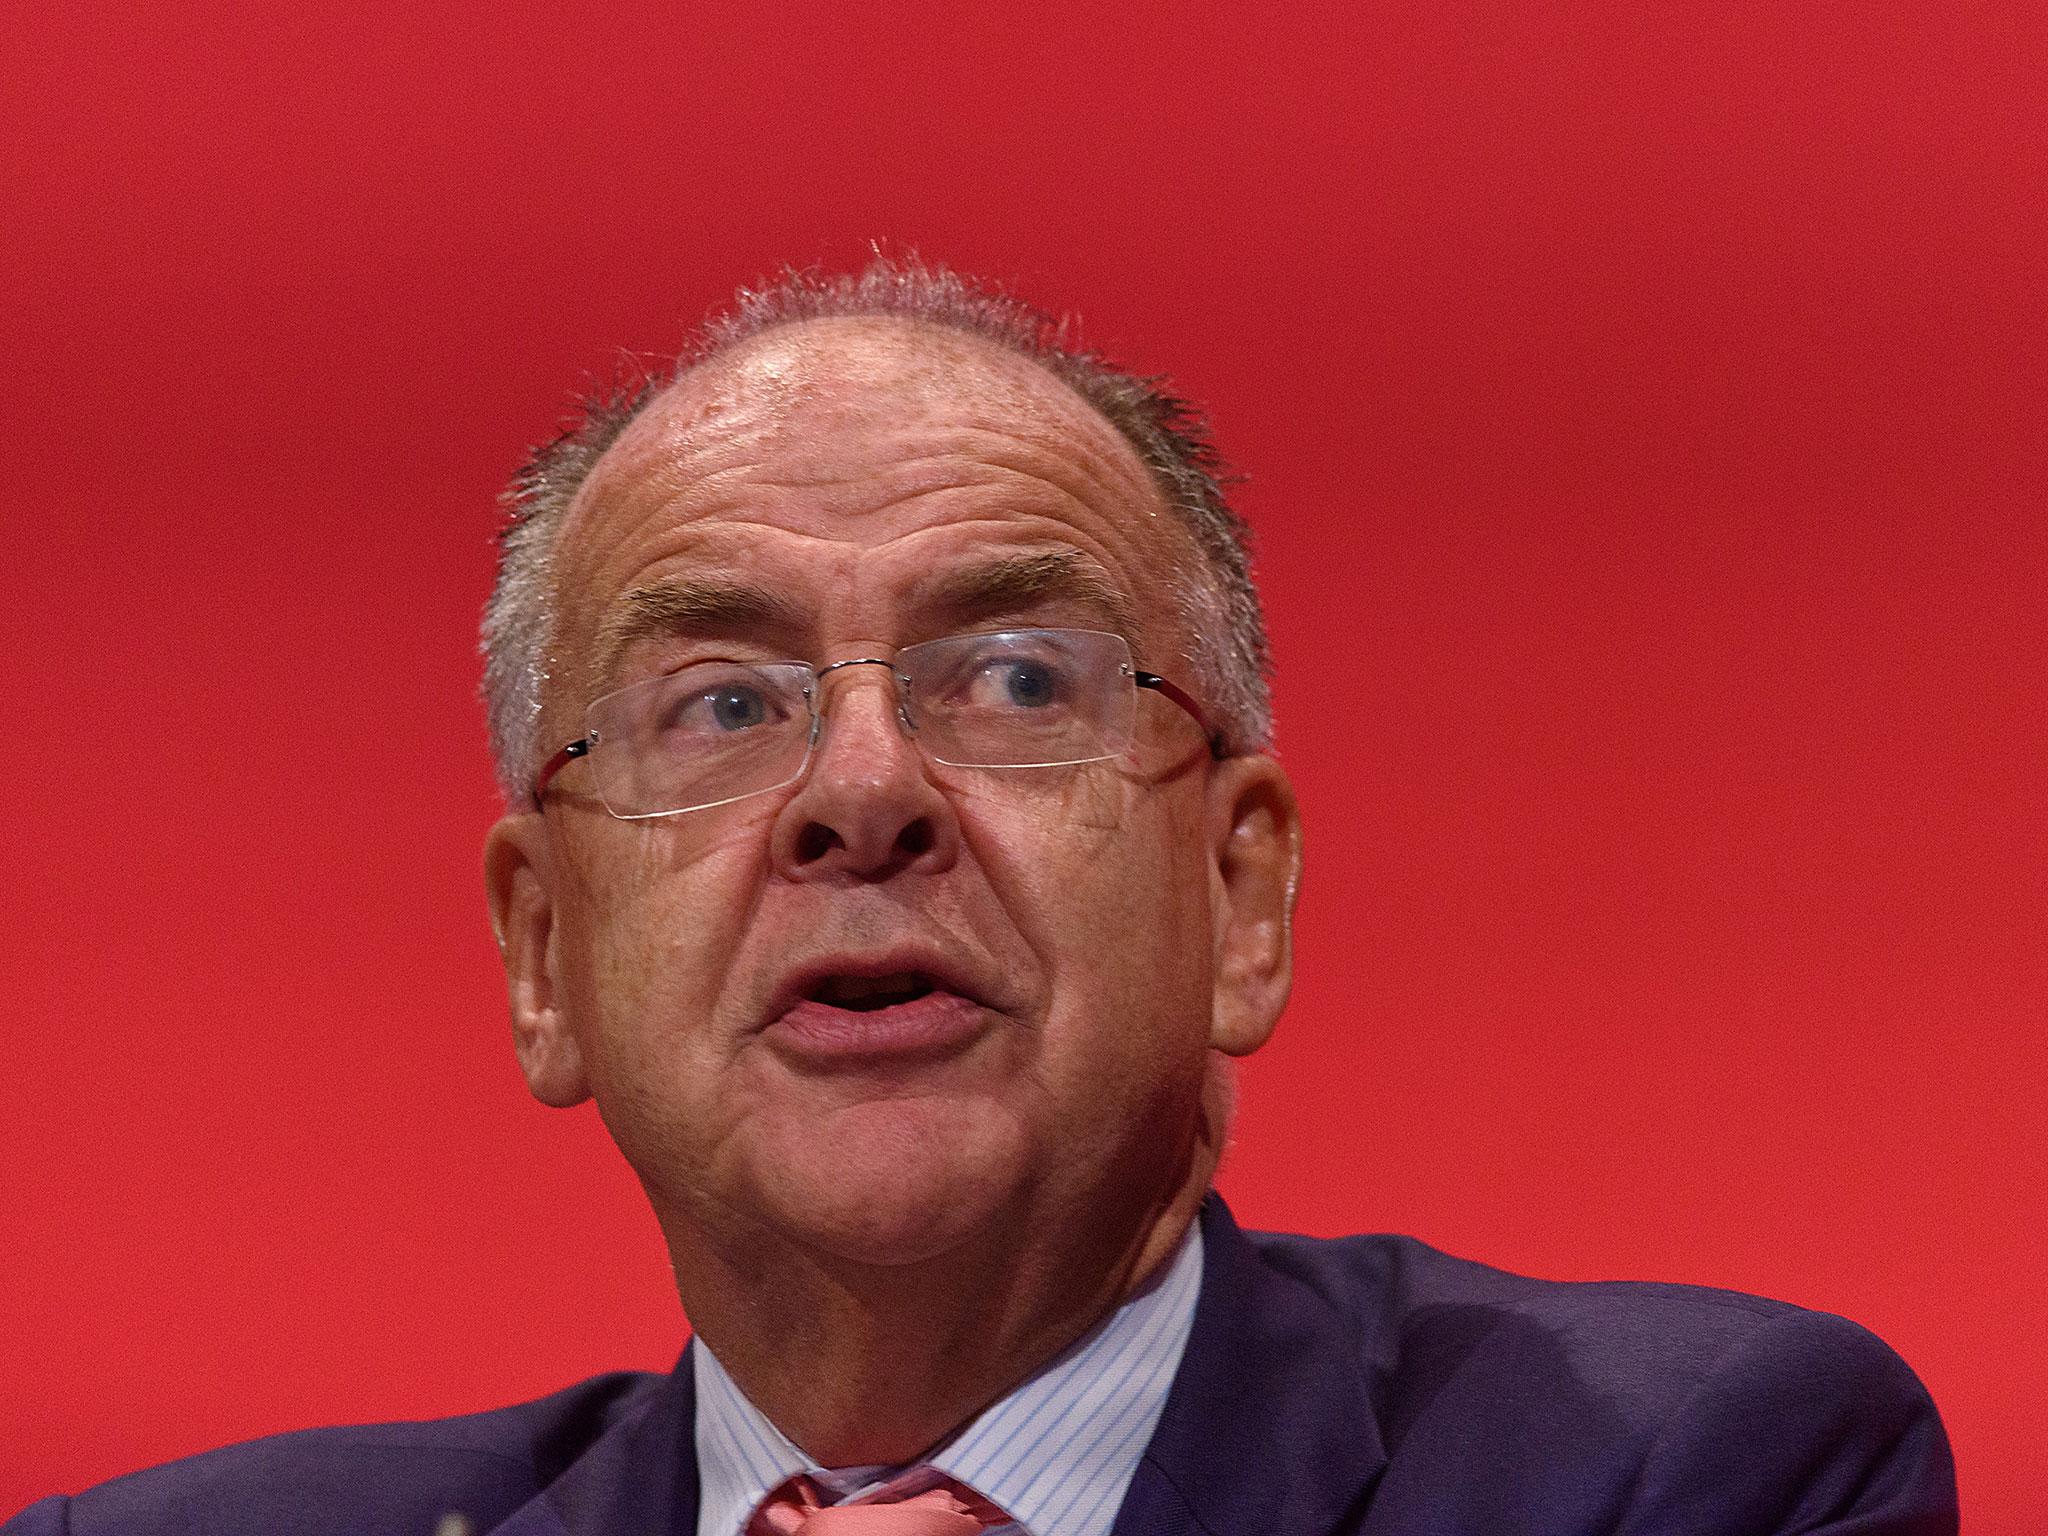 The shadow Justice Secretary Lord Falconer, pictured, said the decision to appoint Sodexo showed that the former Justice Secretary Chris Grayling had been too keen to push through his privatisation programme